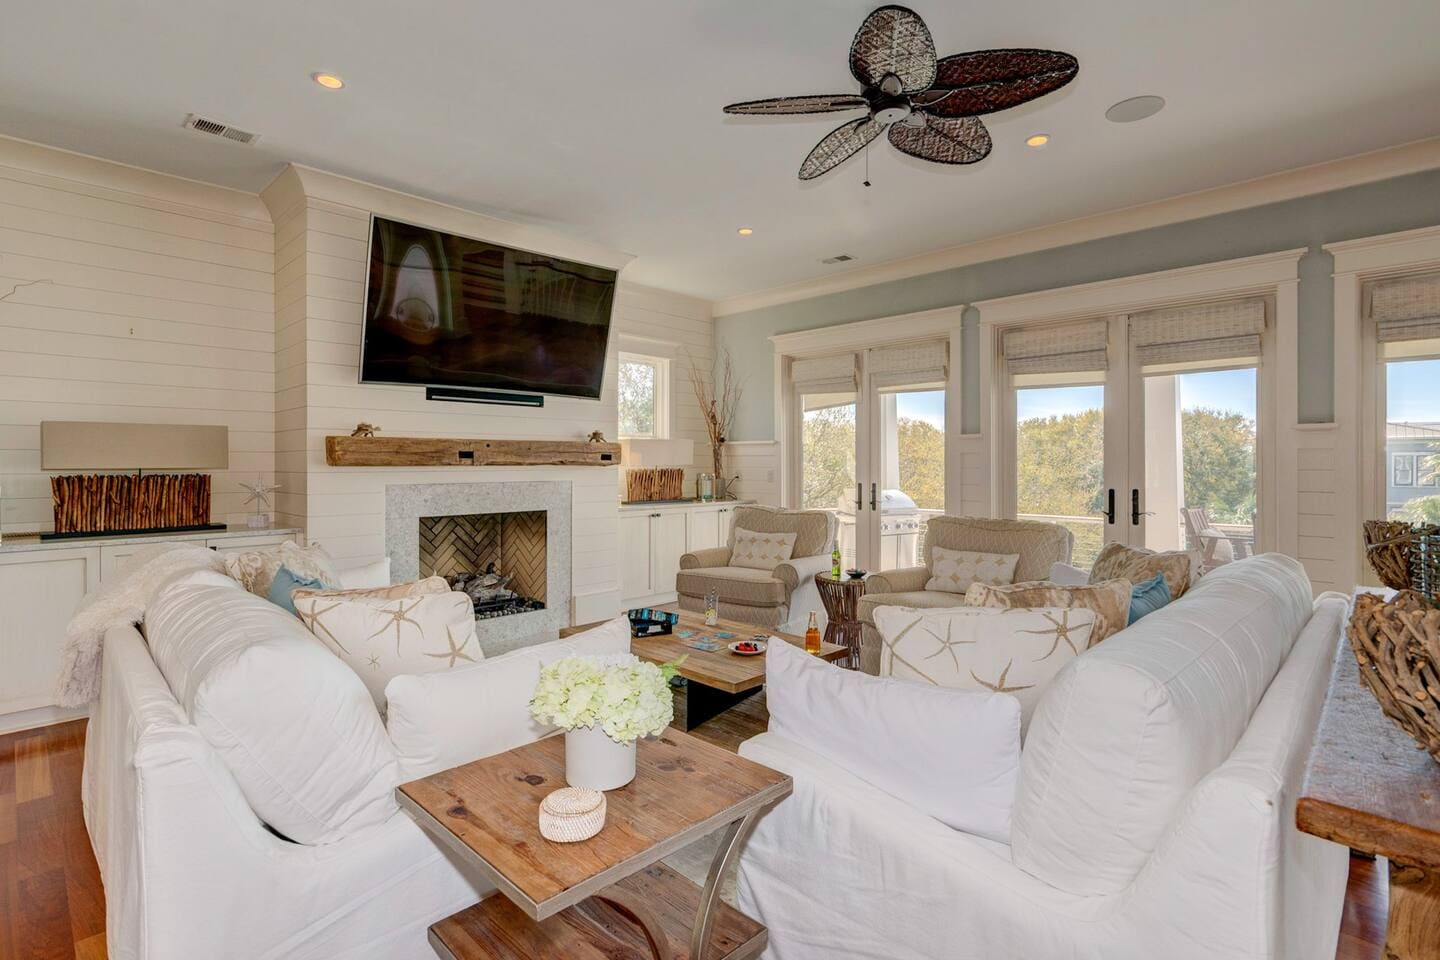 Spacious living room with plenty of seating for your group